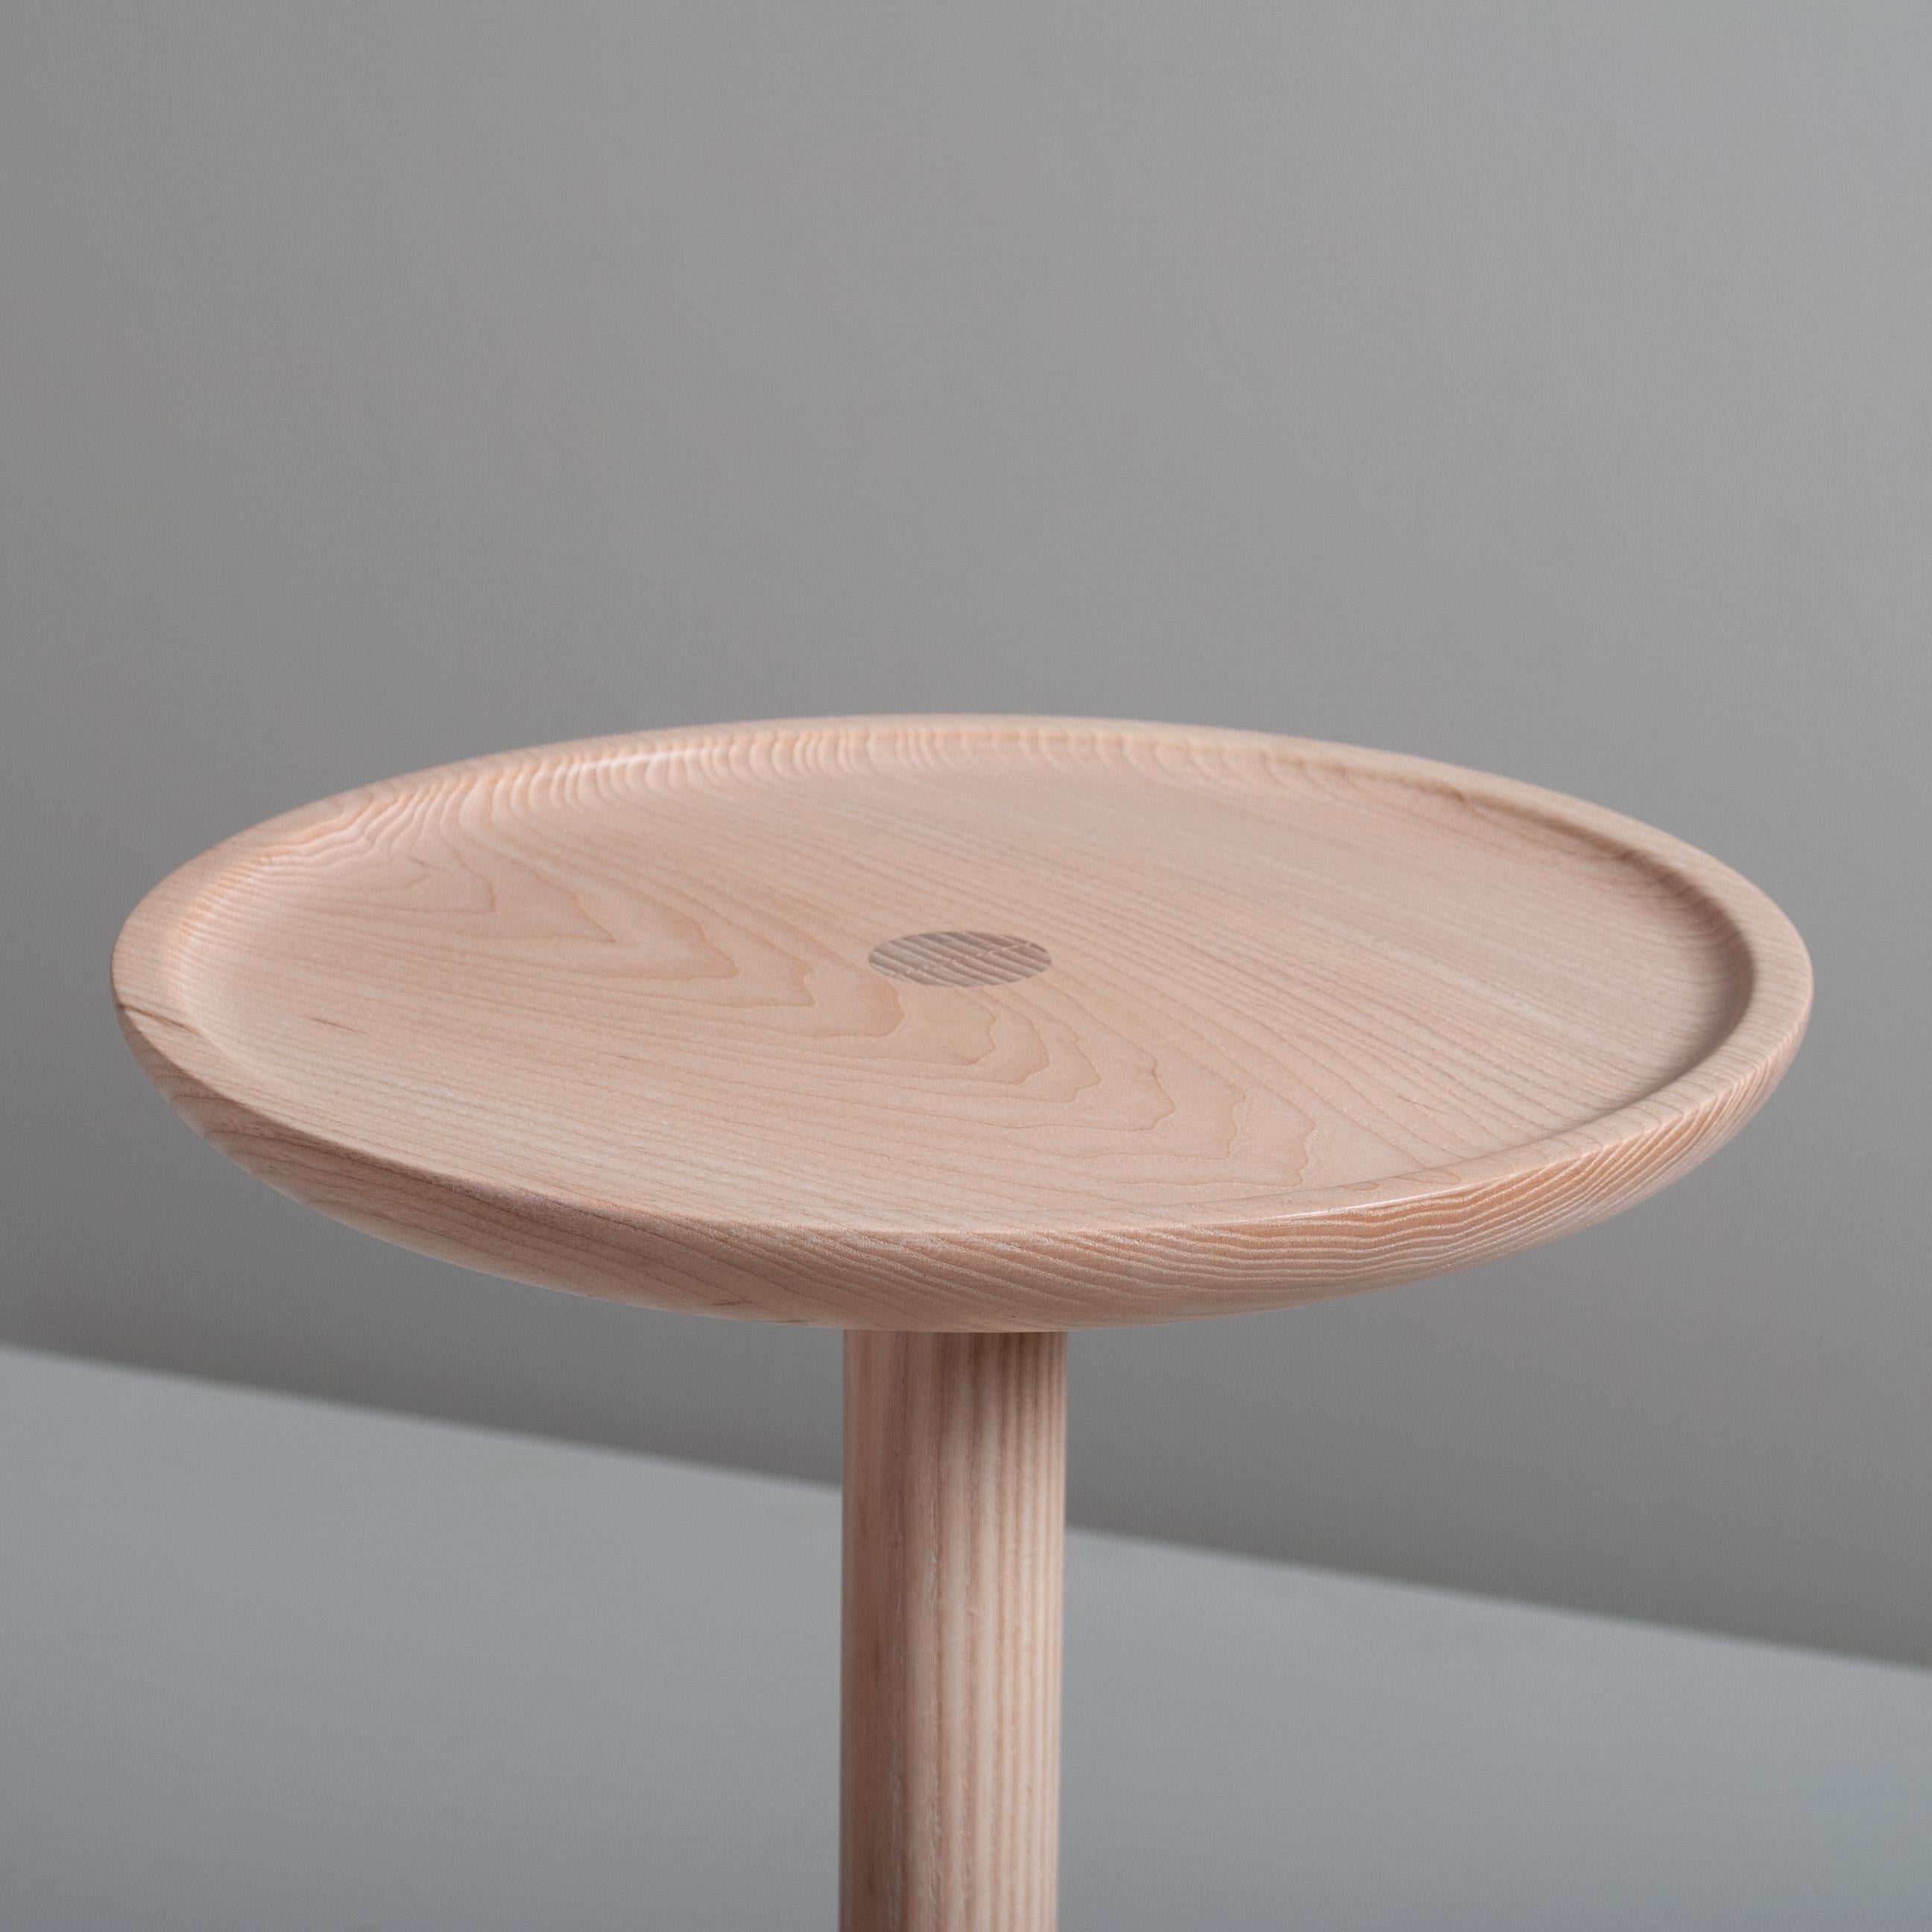 Beautifully hand turned and handcrafted English ash side table in the modernist design. A wonderful piece of craftsmanship. The top surface has a concave 'dished' rim design with visible centre joint detail. This is a bespoke piece of fine quality,